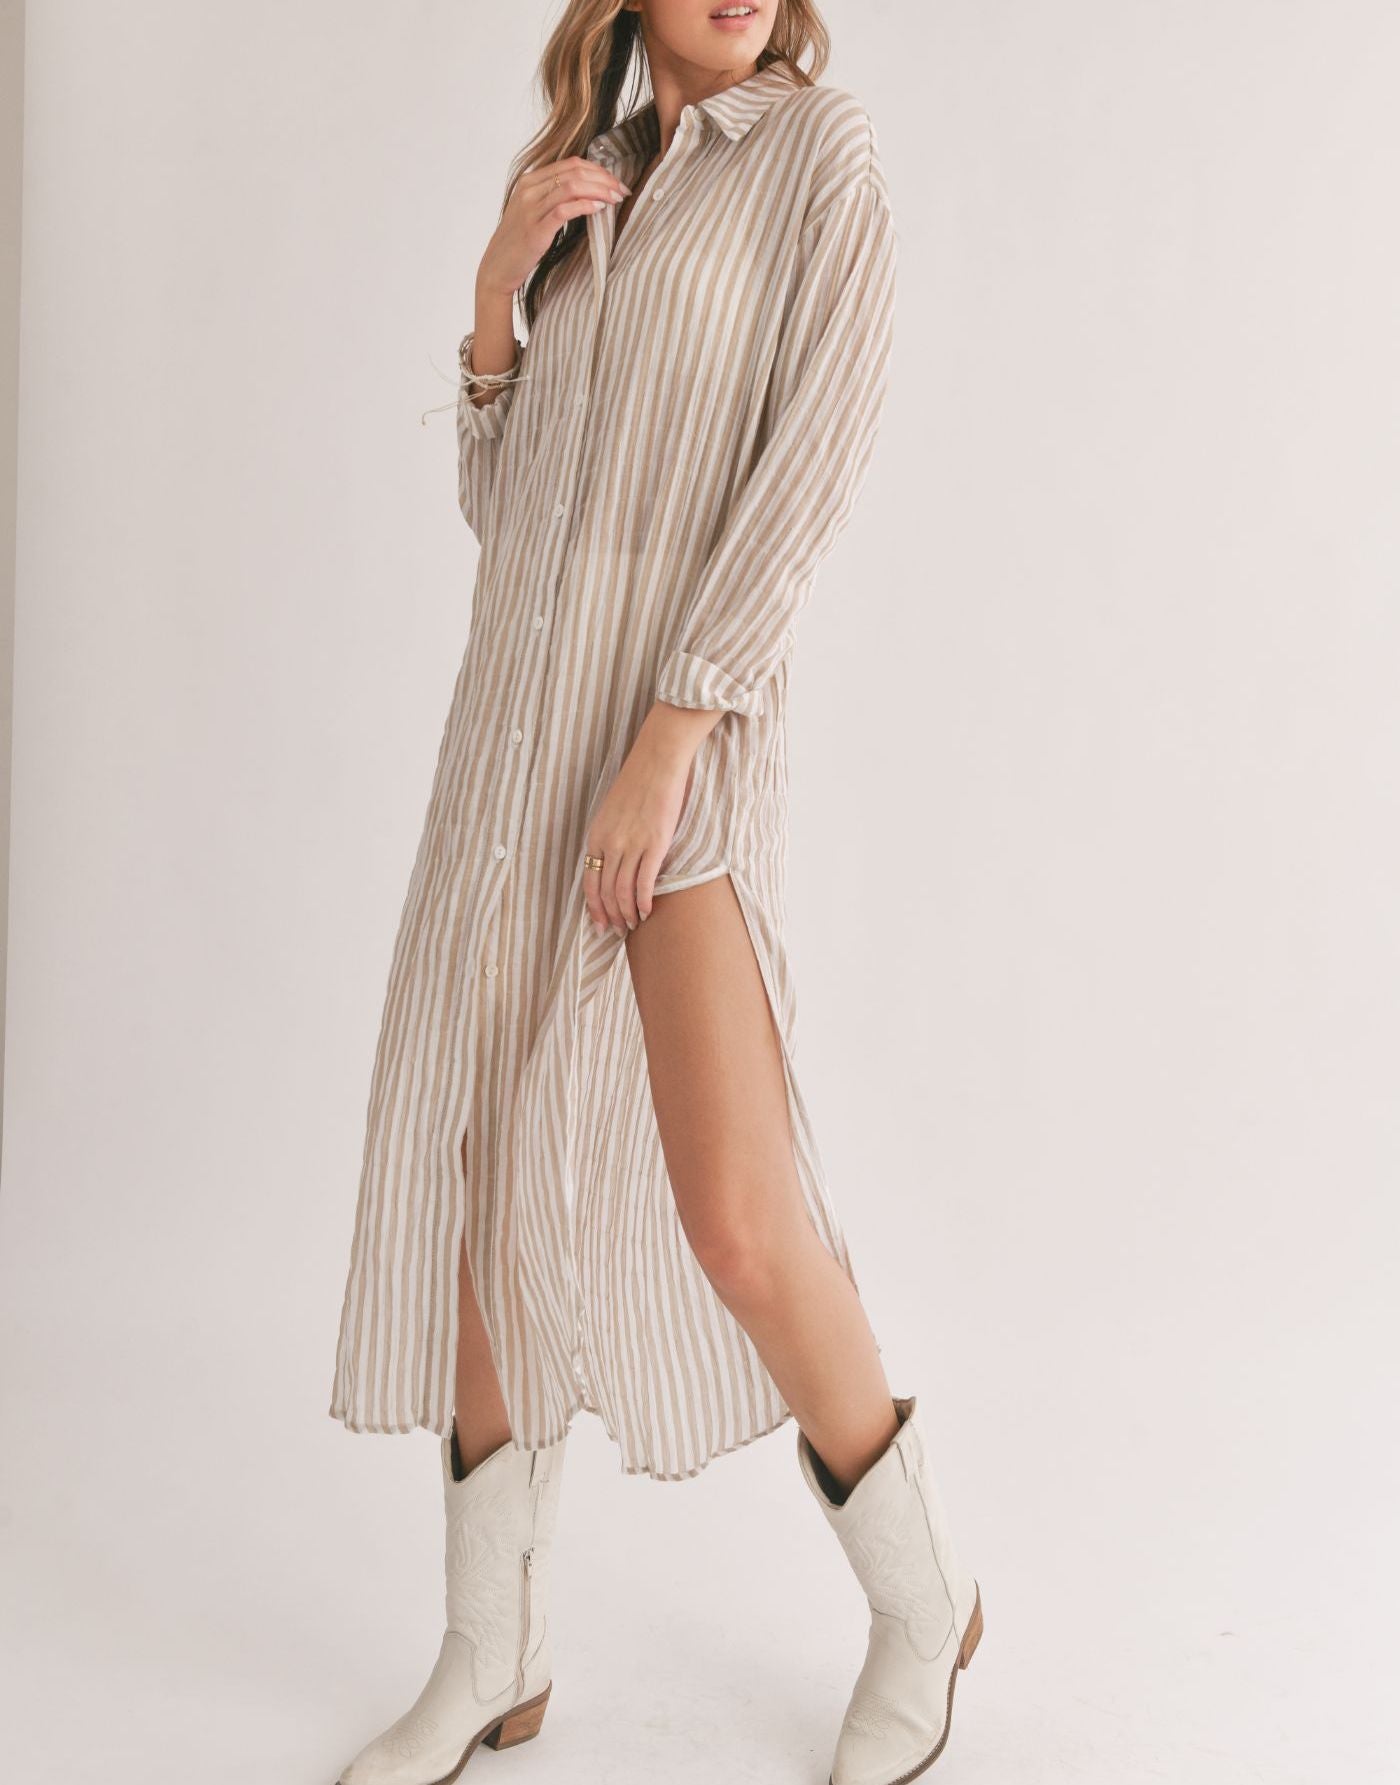 Sadie & Sage, Sands Thin Stripe Outer Layer Duster Shirt in Ivory Stripe - Boutique Dandelion